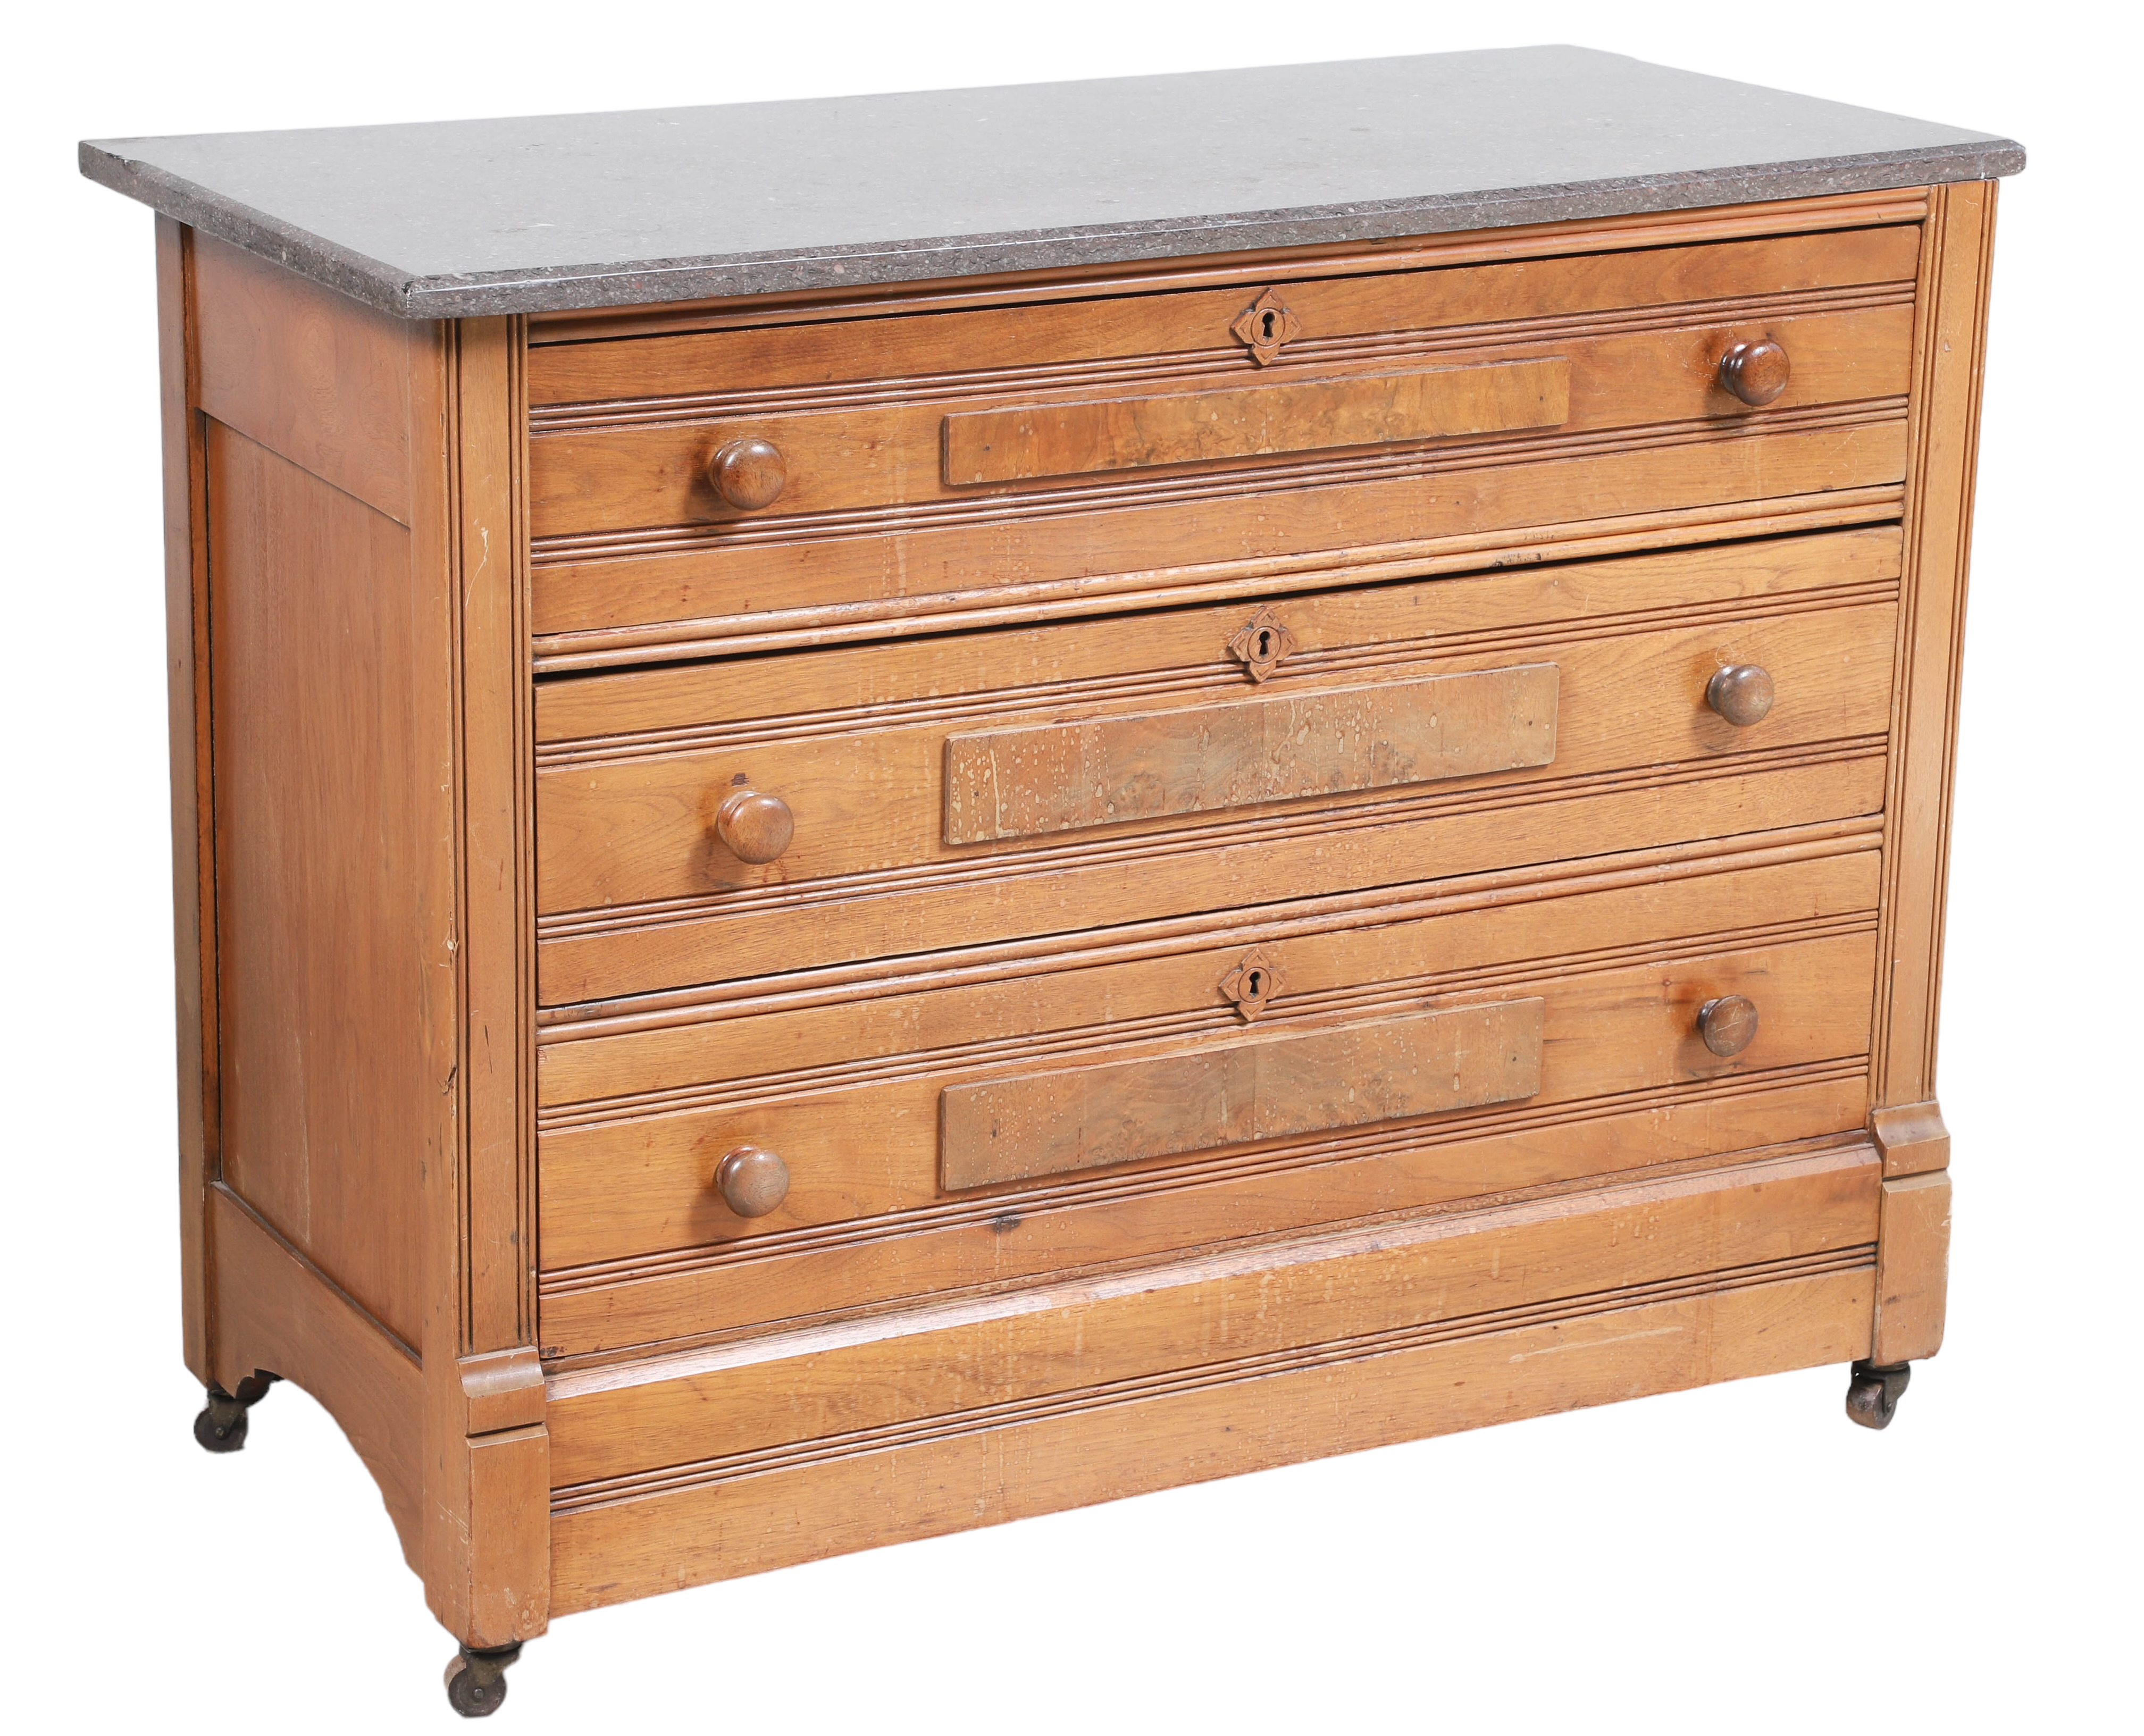 Victorian style marbletop chest 2e1fdc